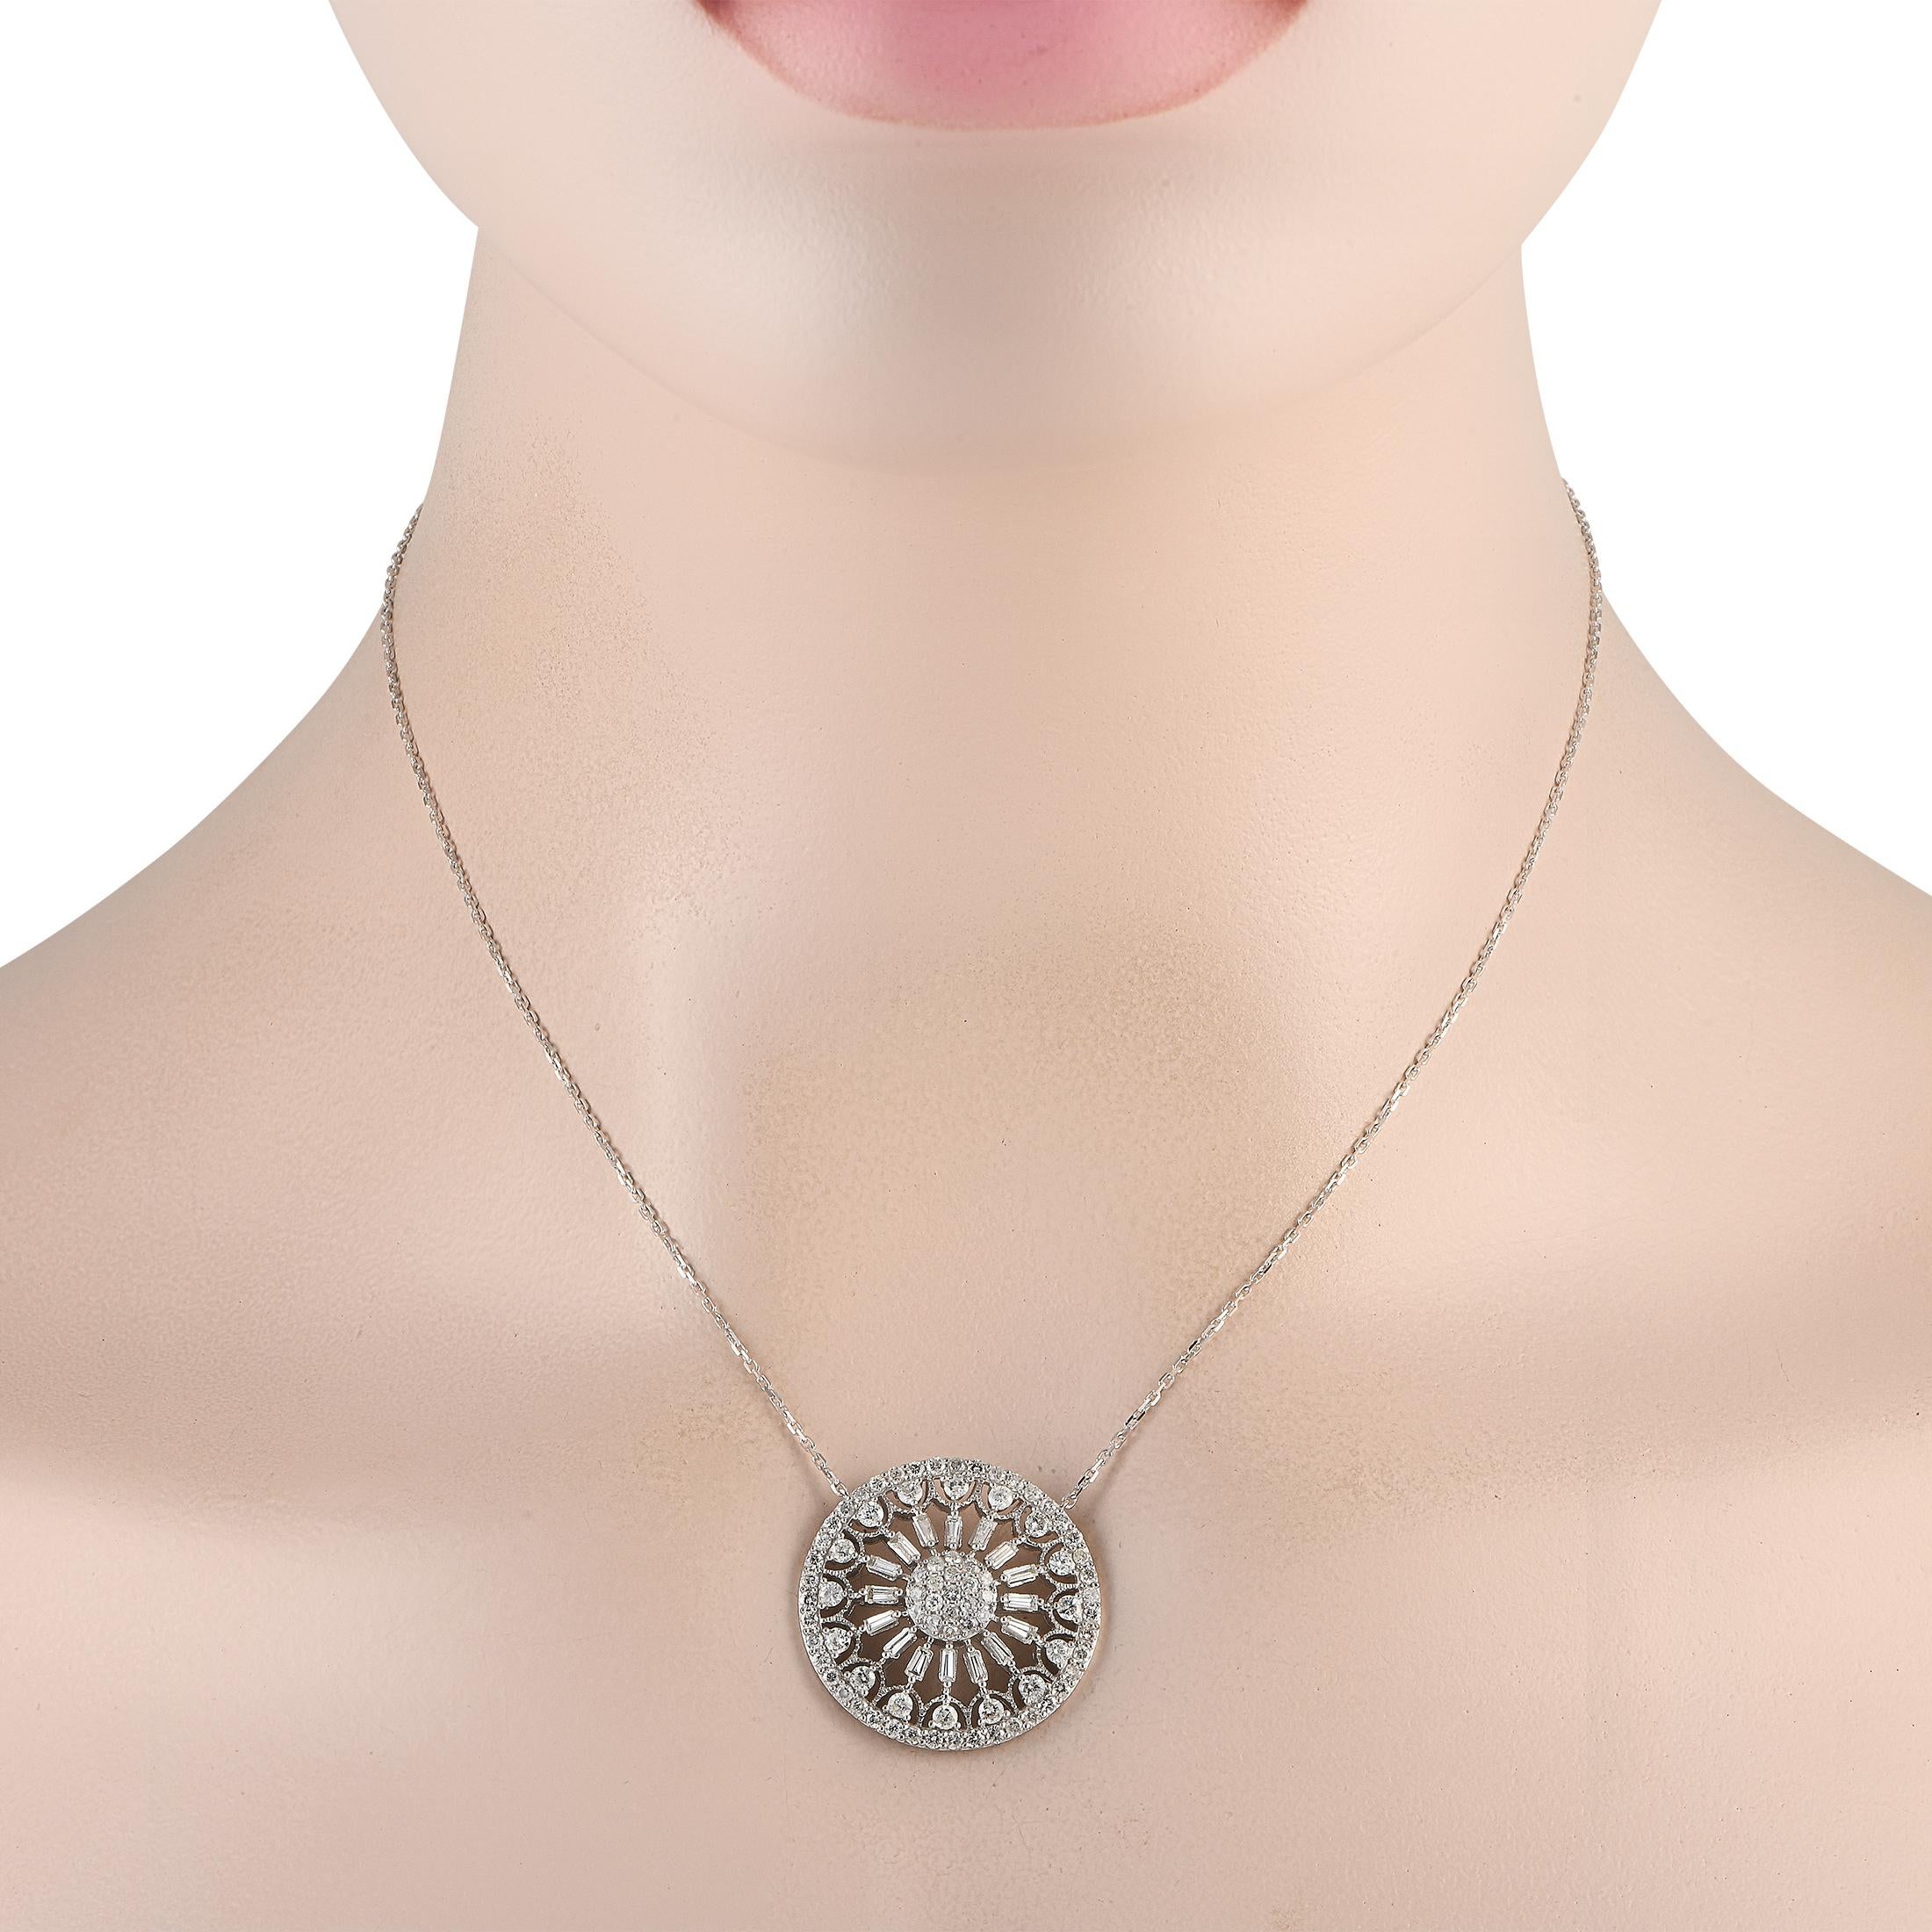 An attractive jewel that can seamlessly transition from day to night. This 14K yellow gold necklace has a 15-long chain with a lobster clasp and a 1-wide open-worked medallion-style pendant. The circular pendant with filigree detail features a